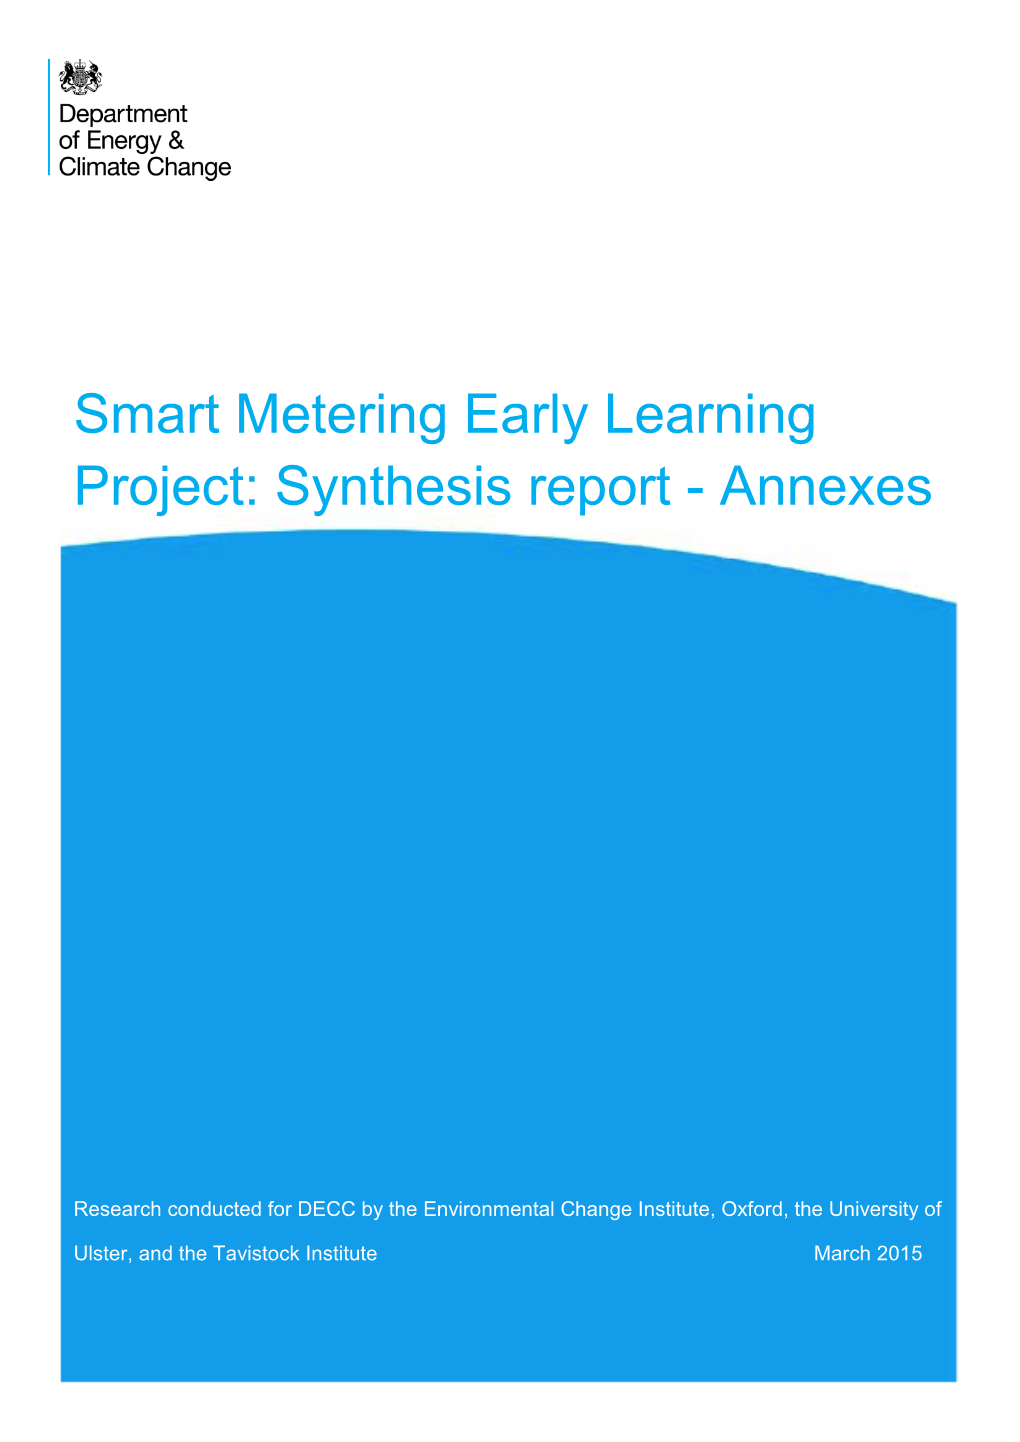 Smart Metering Early Learning Project: Synthesis Report - Annexes